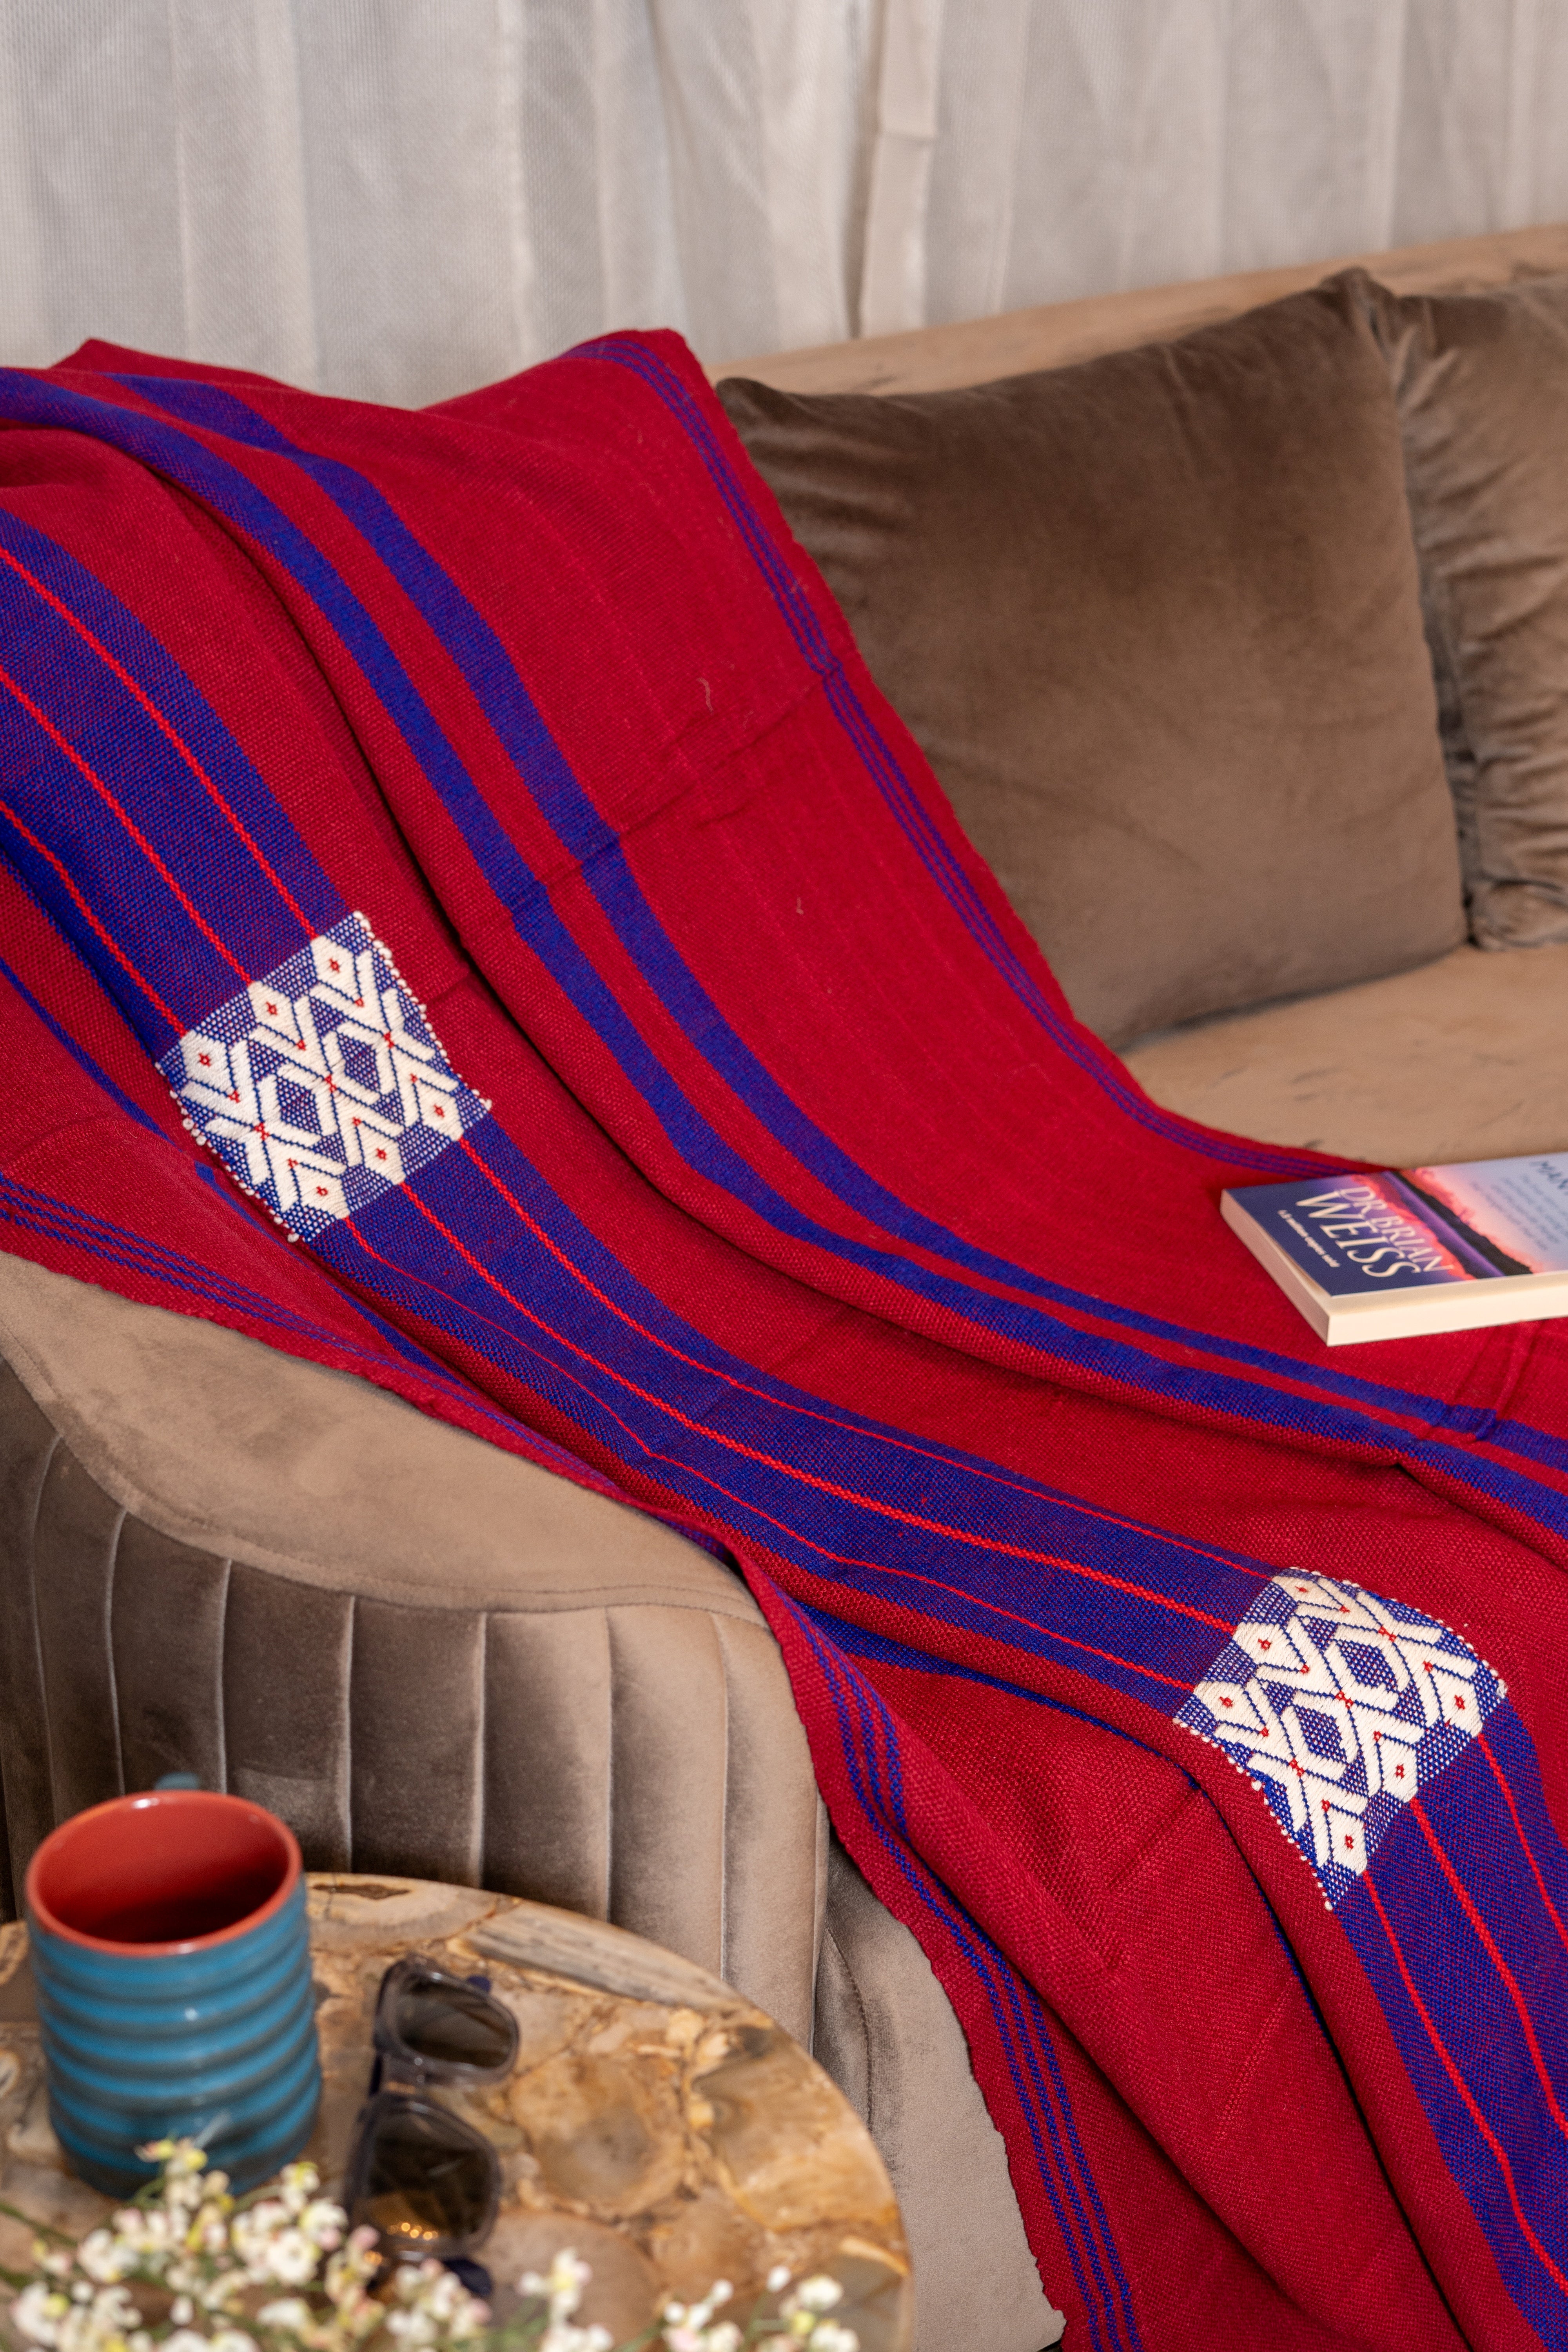 OMVAI Artisanal Patterned Cashmilon Woven Throw Blanket / Comforter Burgandy with Blue, and White weave border